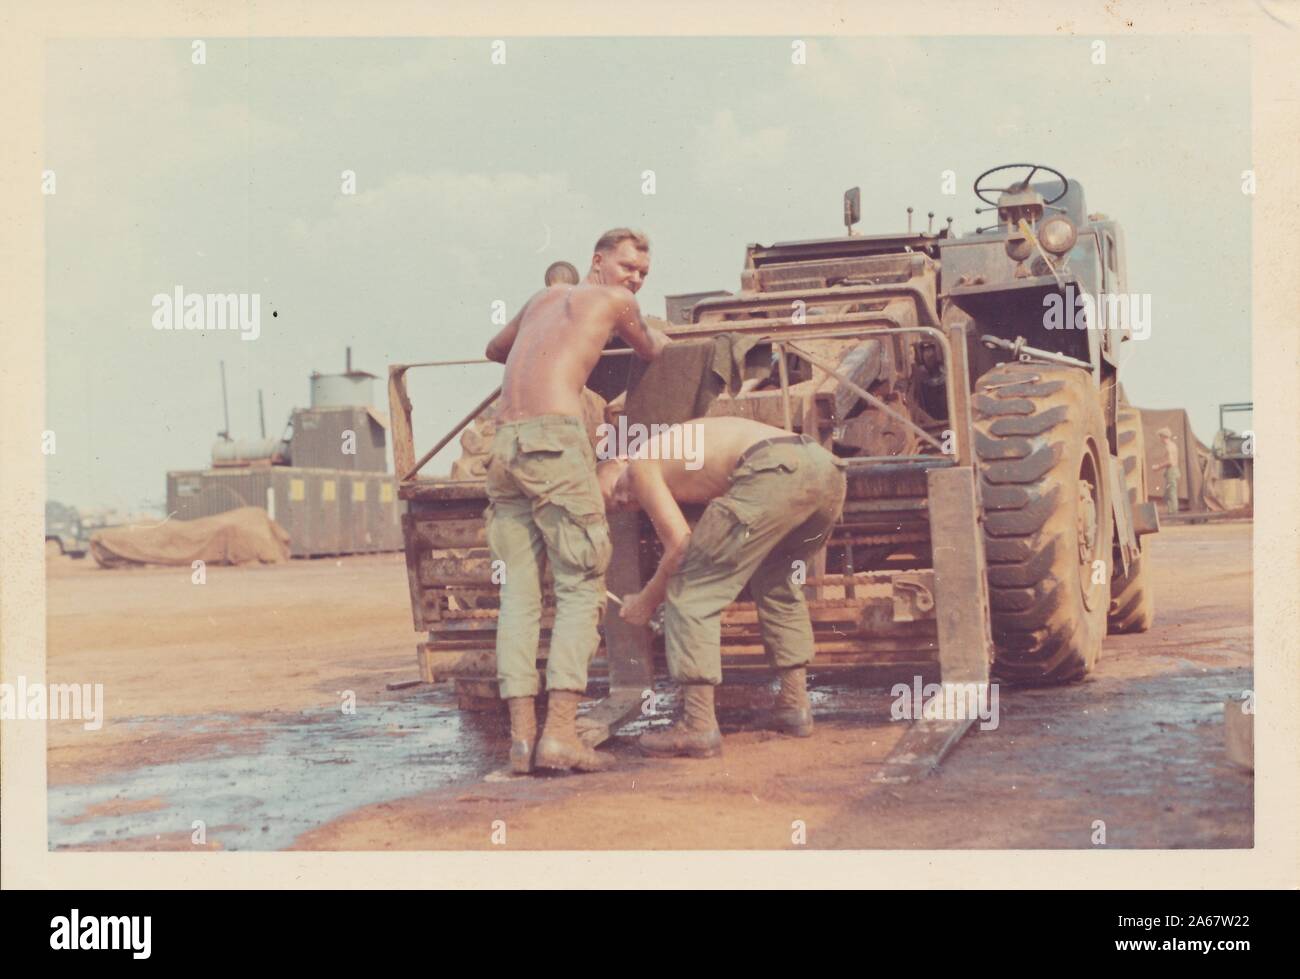 Several shirtless American servicemen look over their shoulders as they work on a military forklift in Vietnam during the Vietnam War, 1970. () Stock Photo